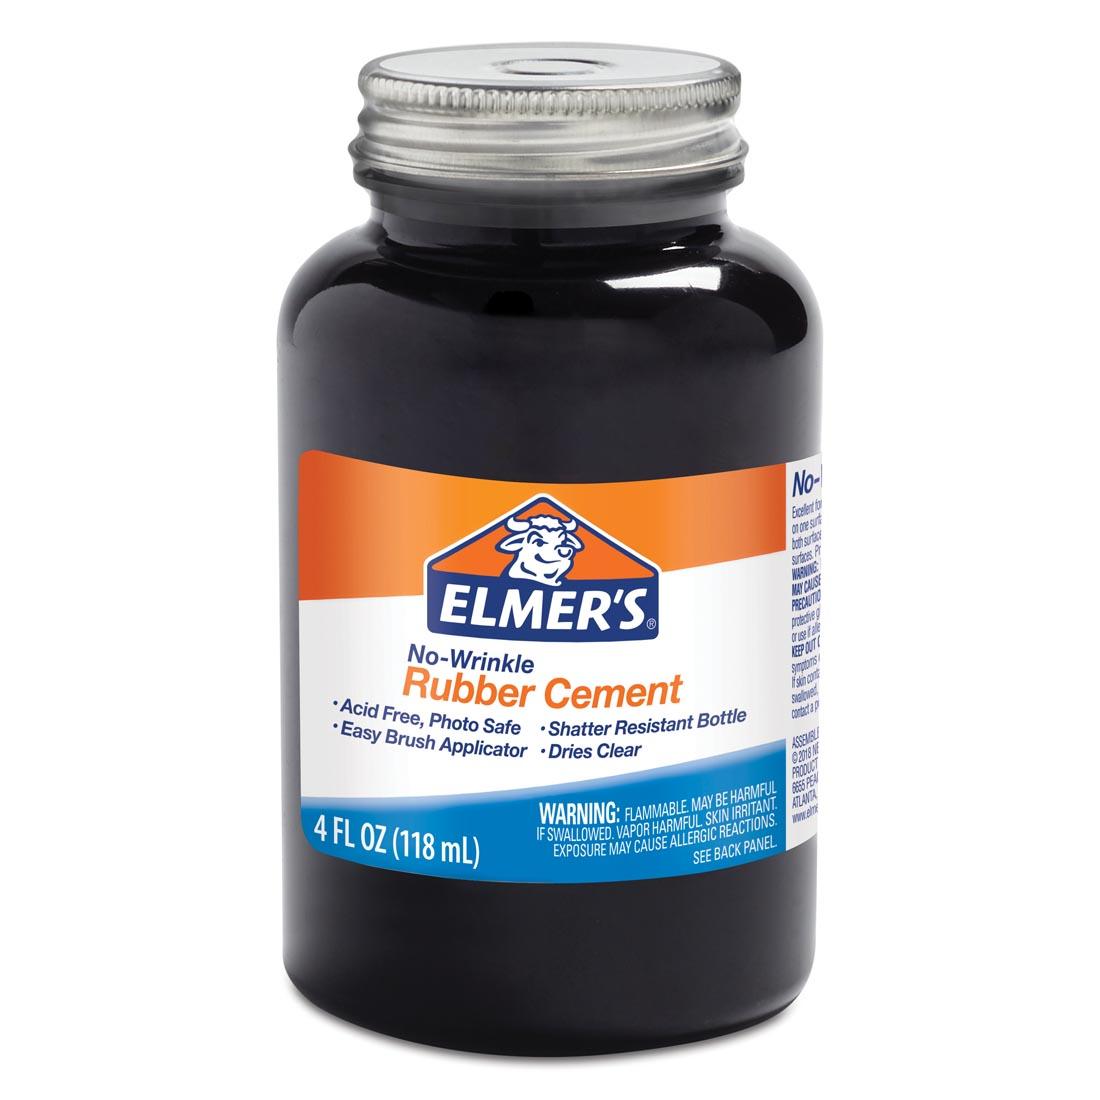 Elmer's No Wrinkle Rubber Cement